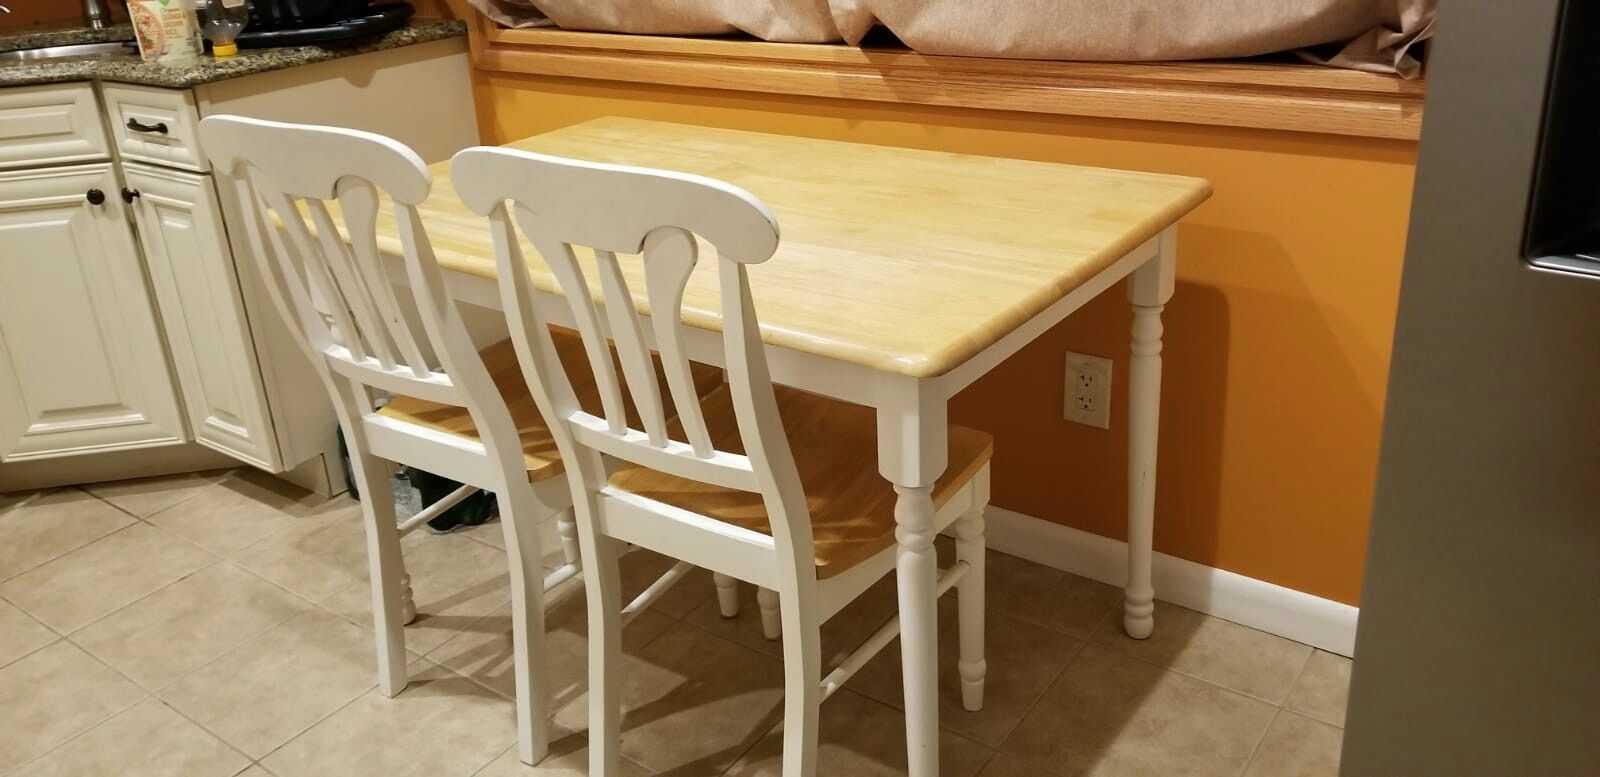 maple wood kitchen set, (table and 4 chairs).